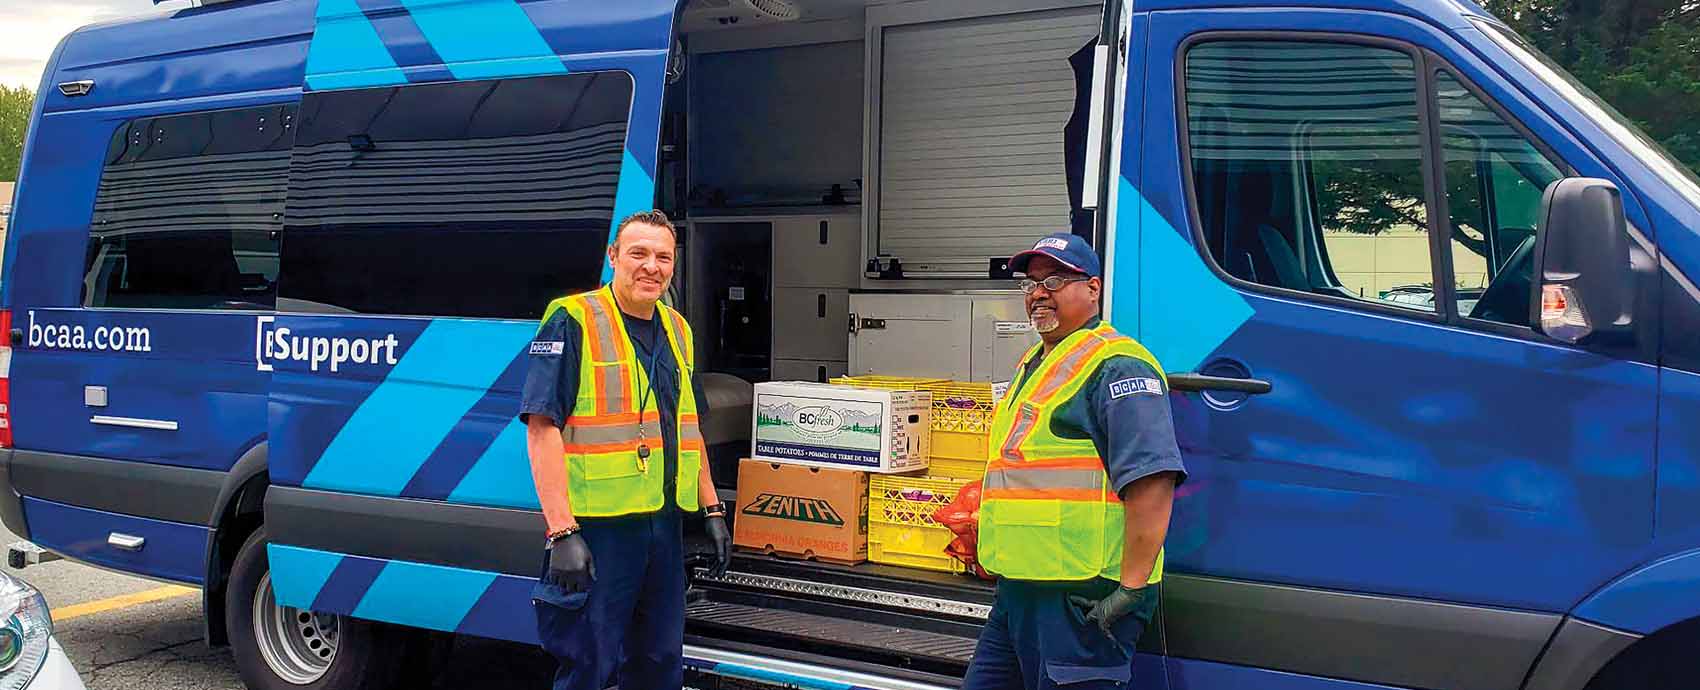 BCAA Roadside Assistance drivers helped deliver to BC food banks in the early days of the COVID-19 pandemic